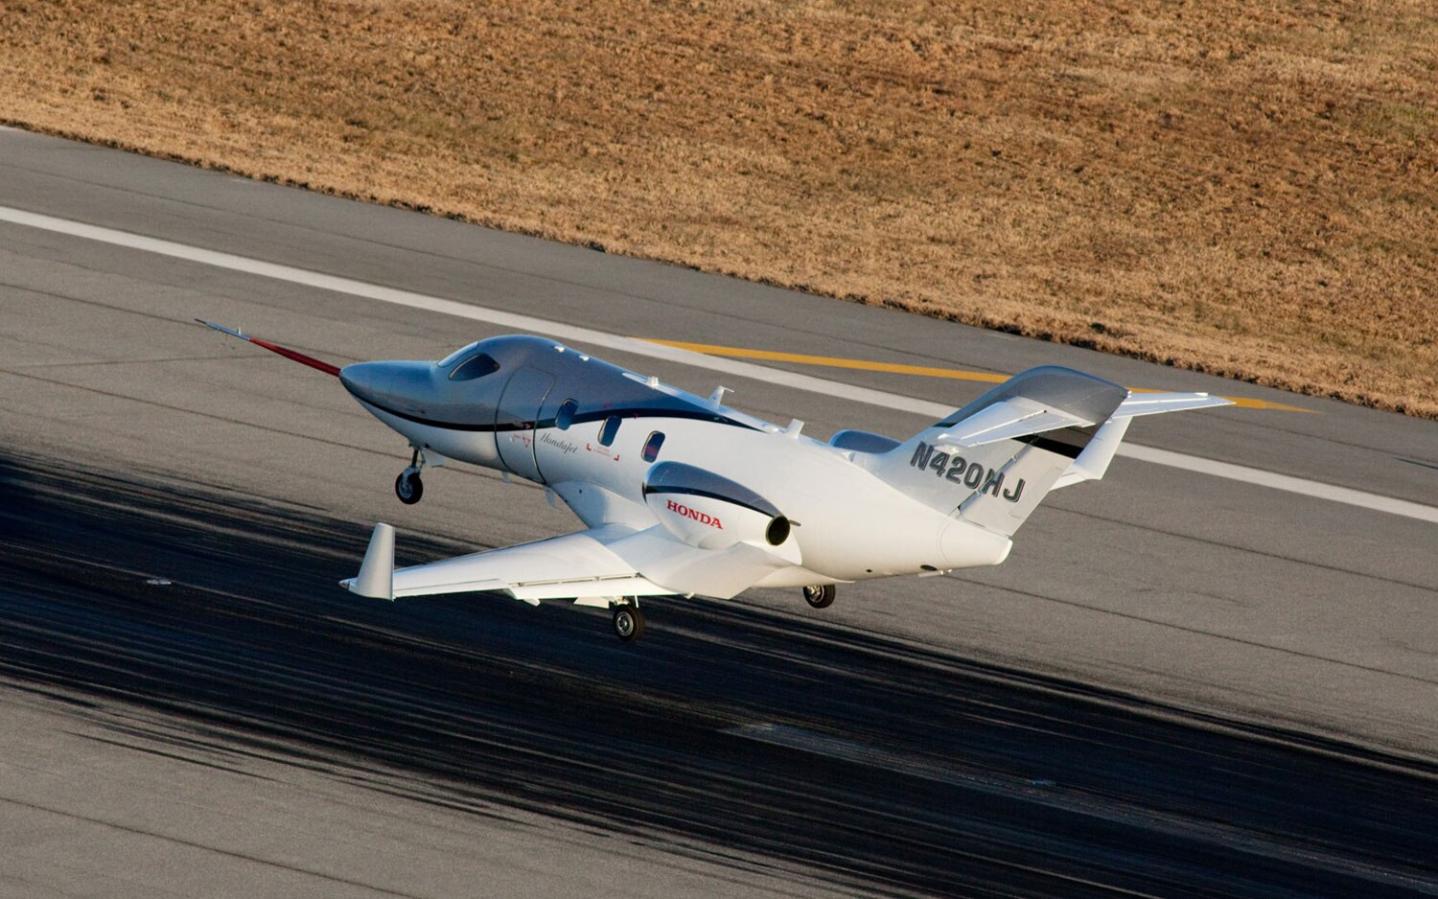 What are the Key Features and Innovations that Set the HondaJet Apart from its Competitors?